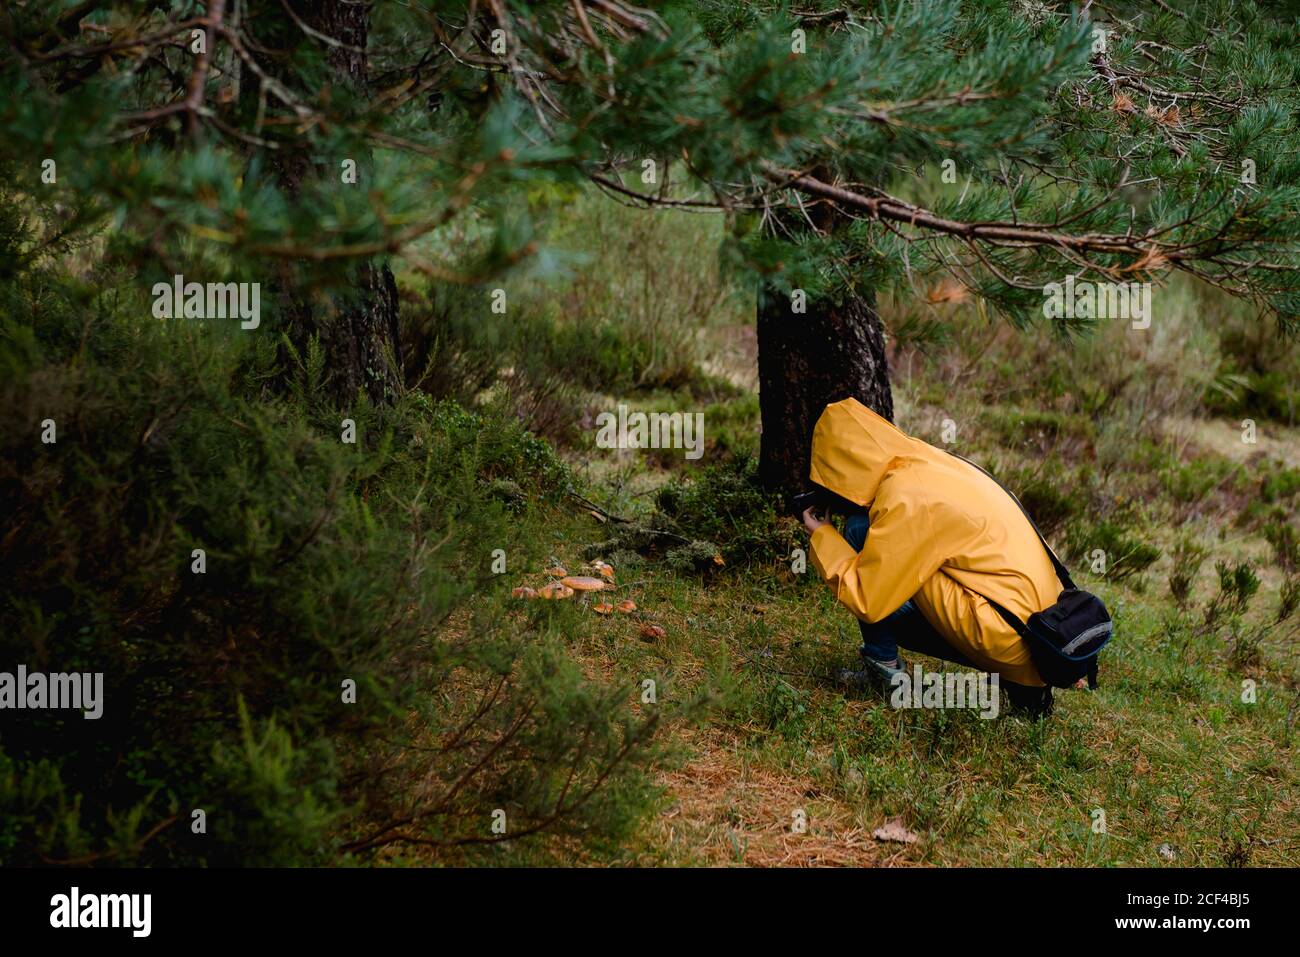 Person in yellow raincoat photographing mushrooms Stock Photo